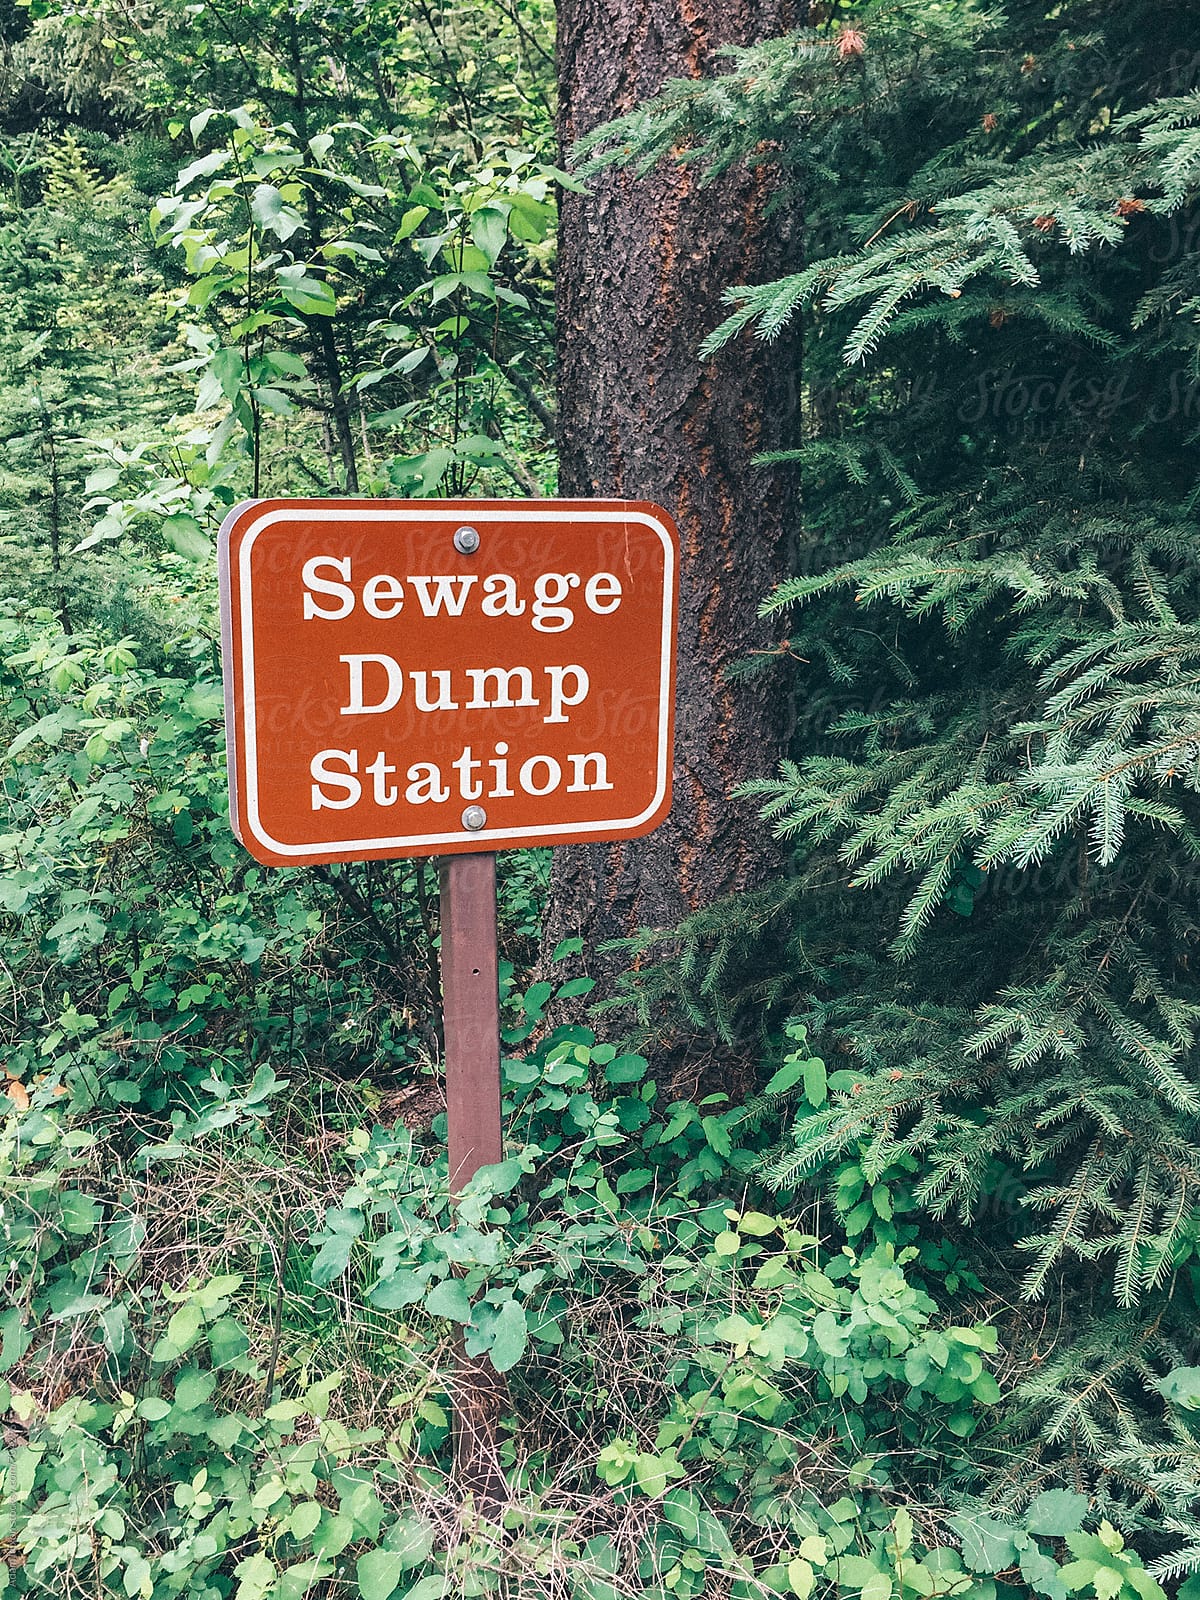 Sewage Dump Station sign in the middle of the woods